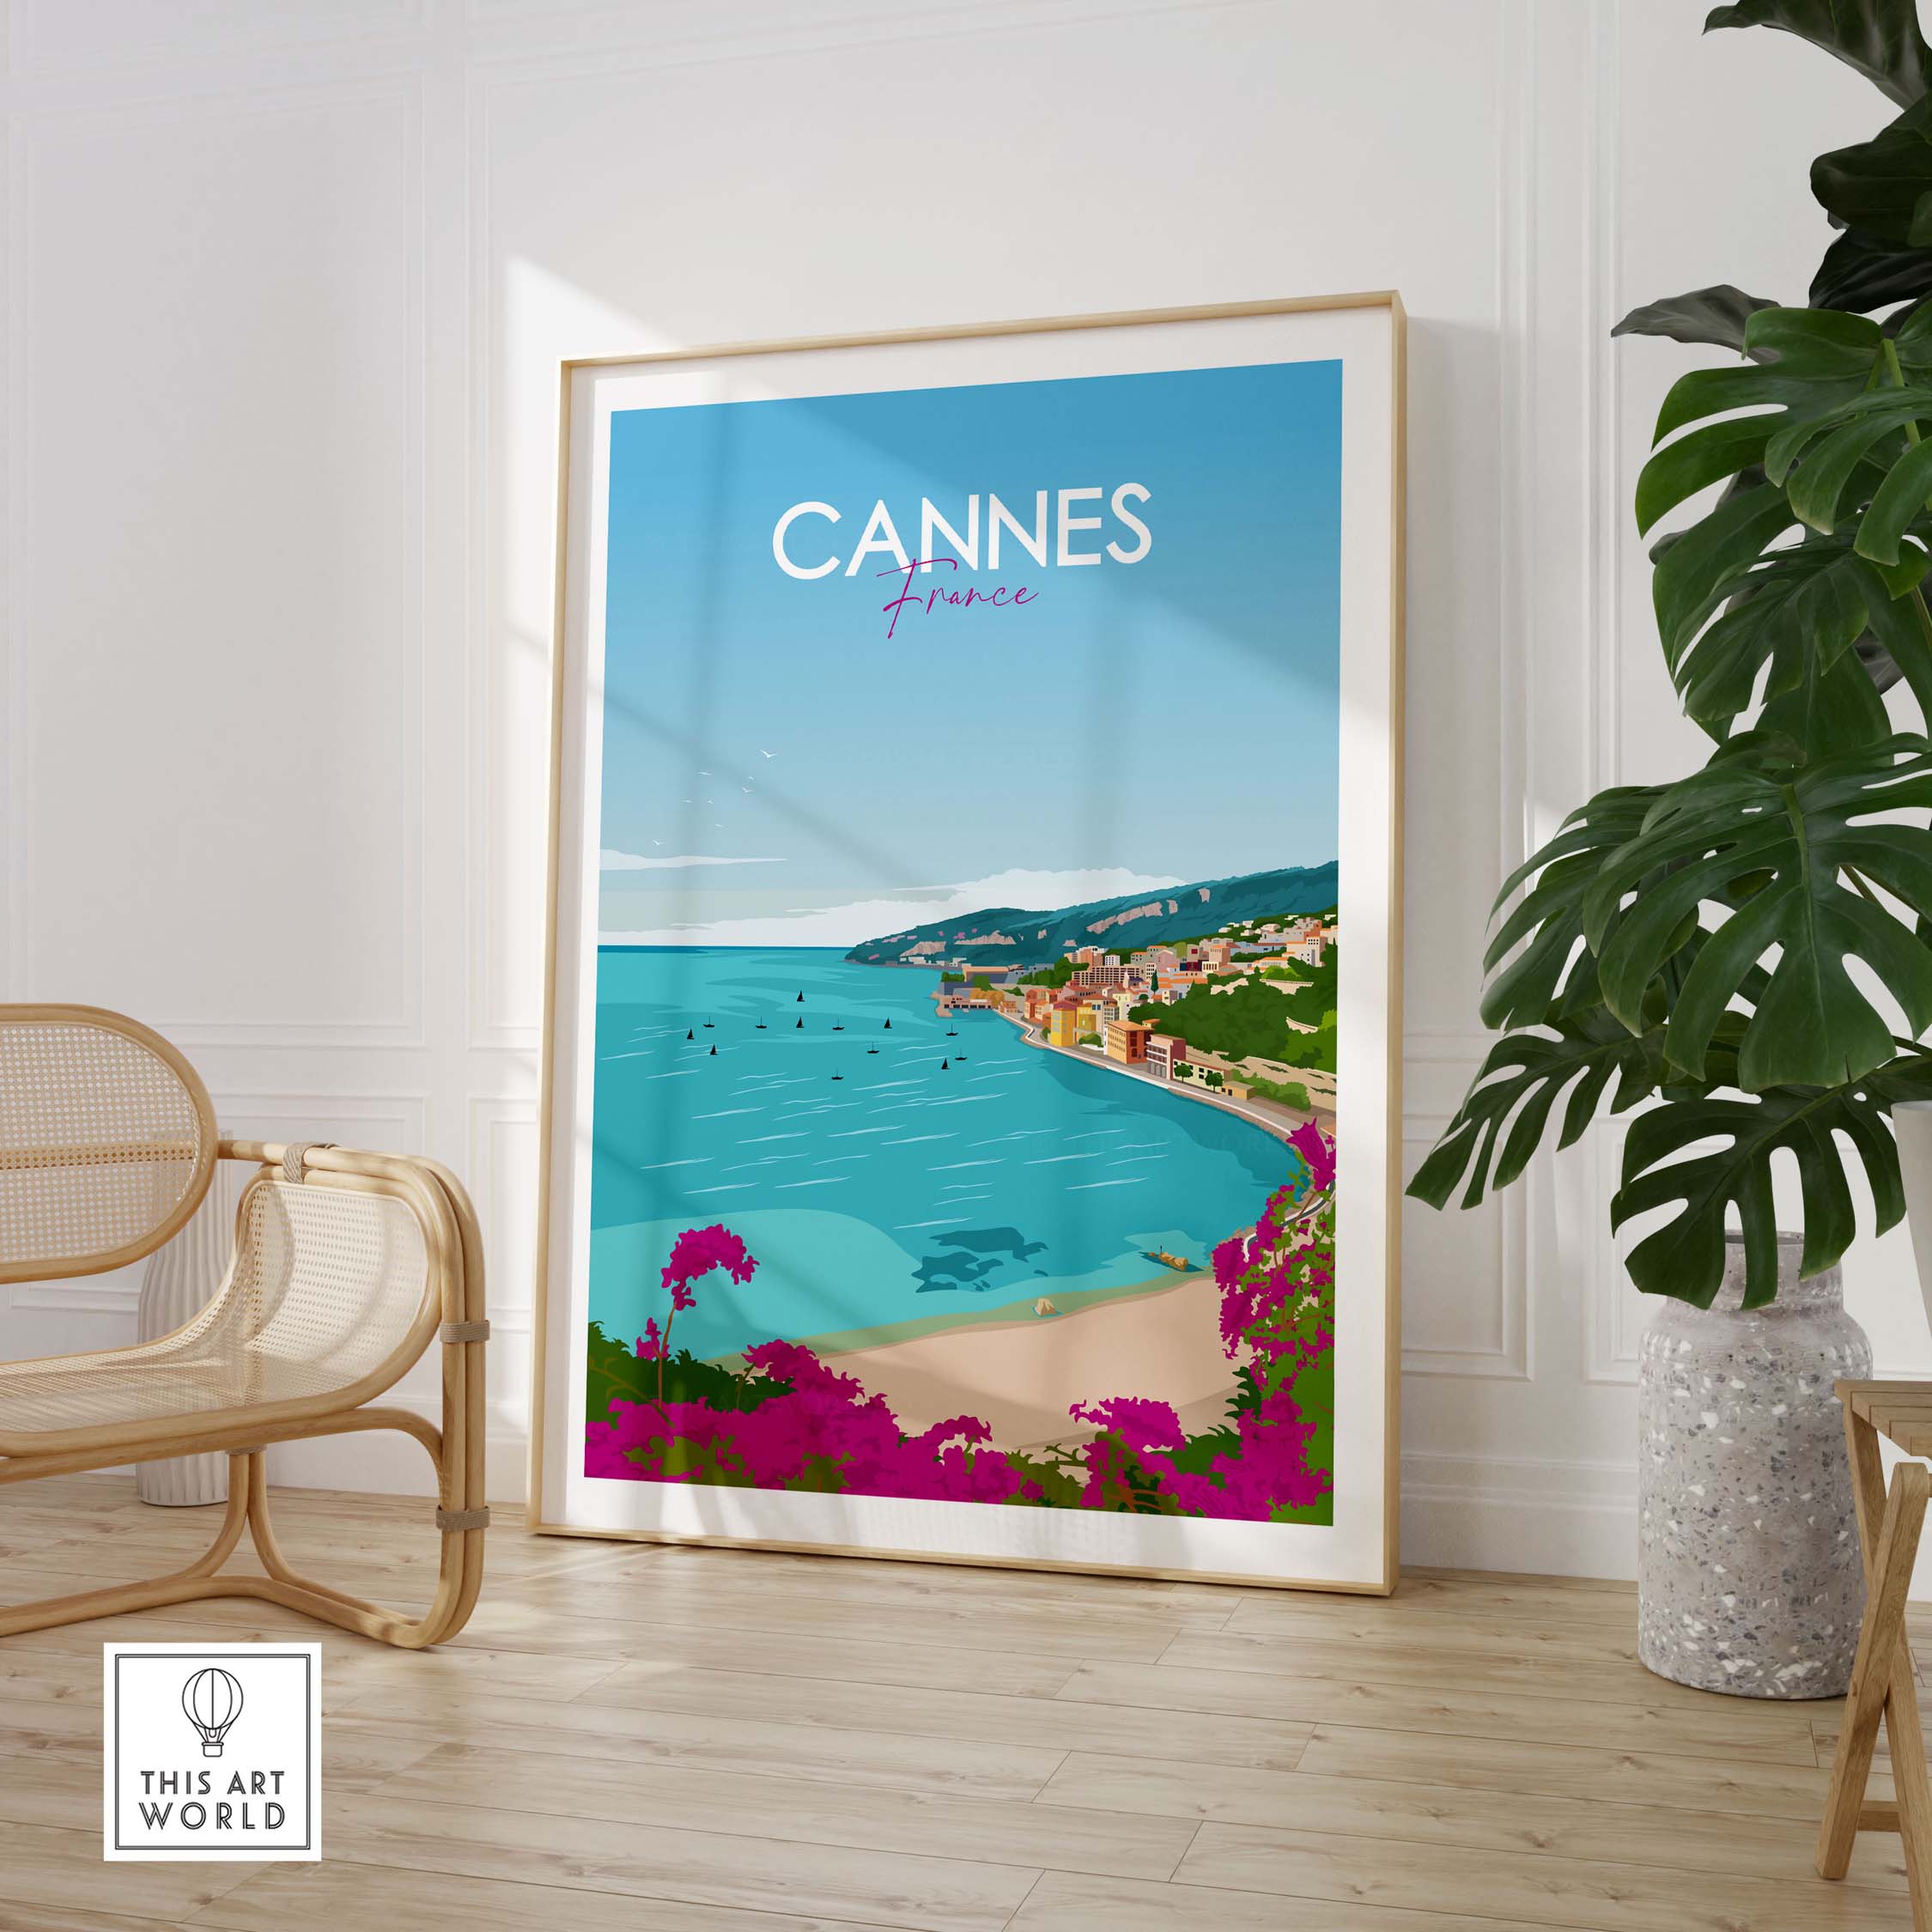 Cannes Poster France Print | This Art World